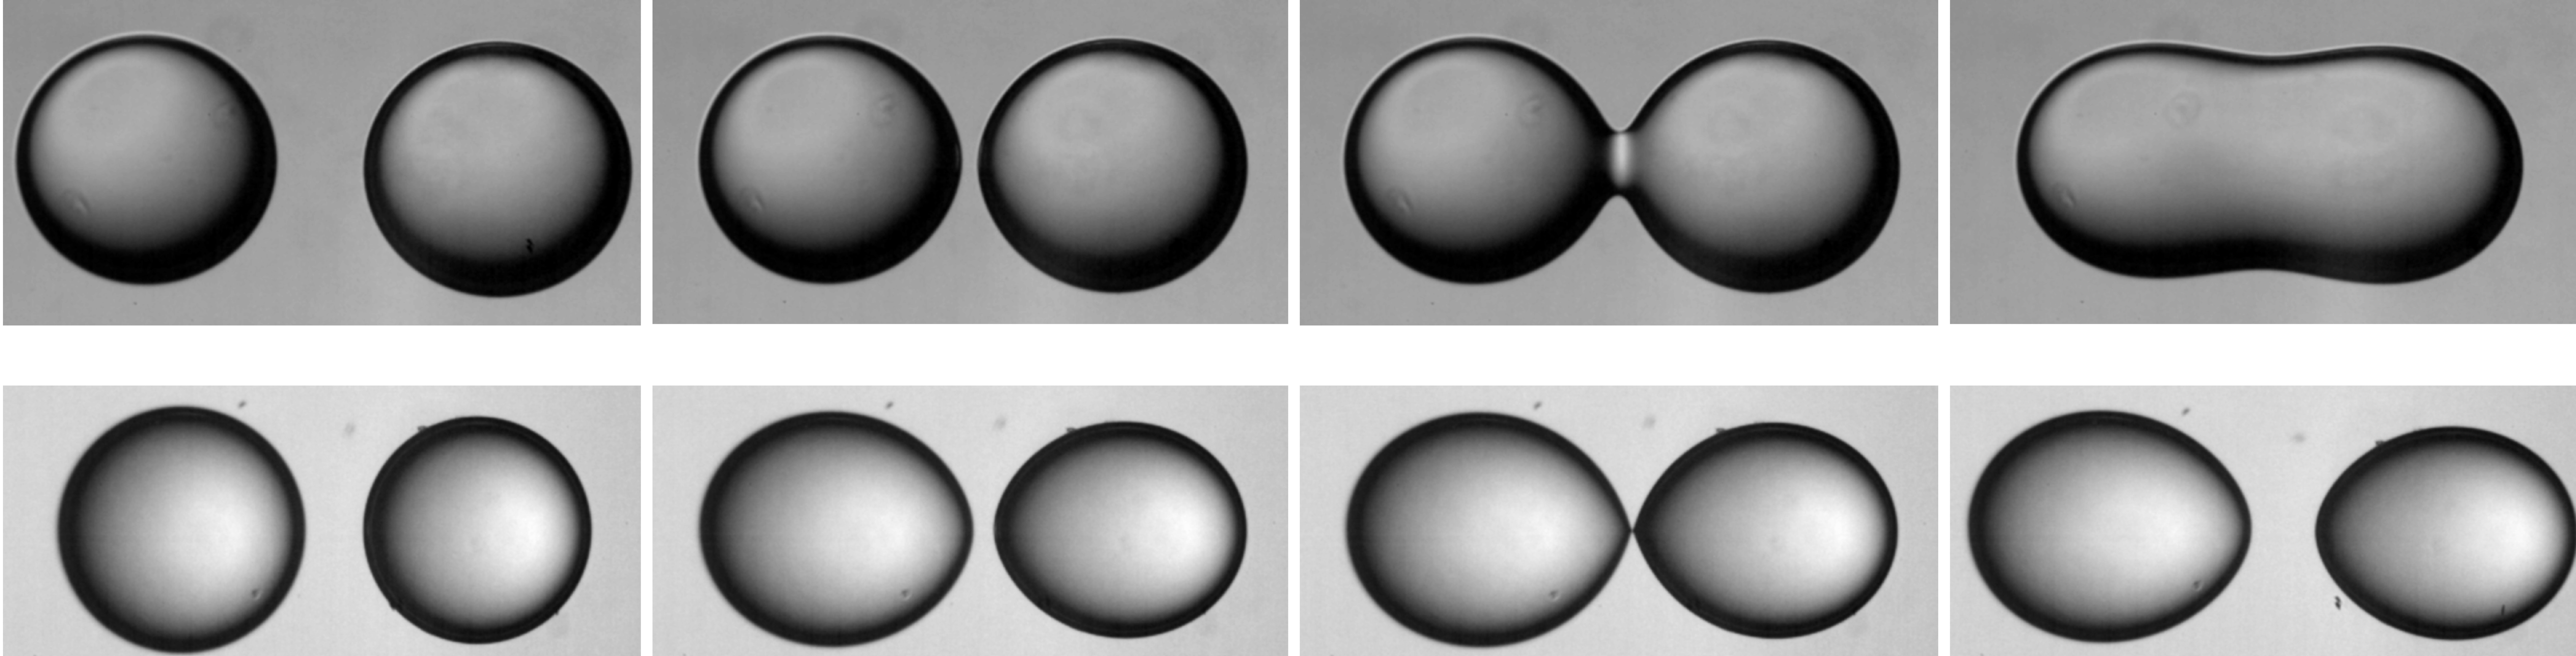 Non-coalescence of suspended droplets under electric field